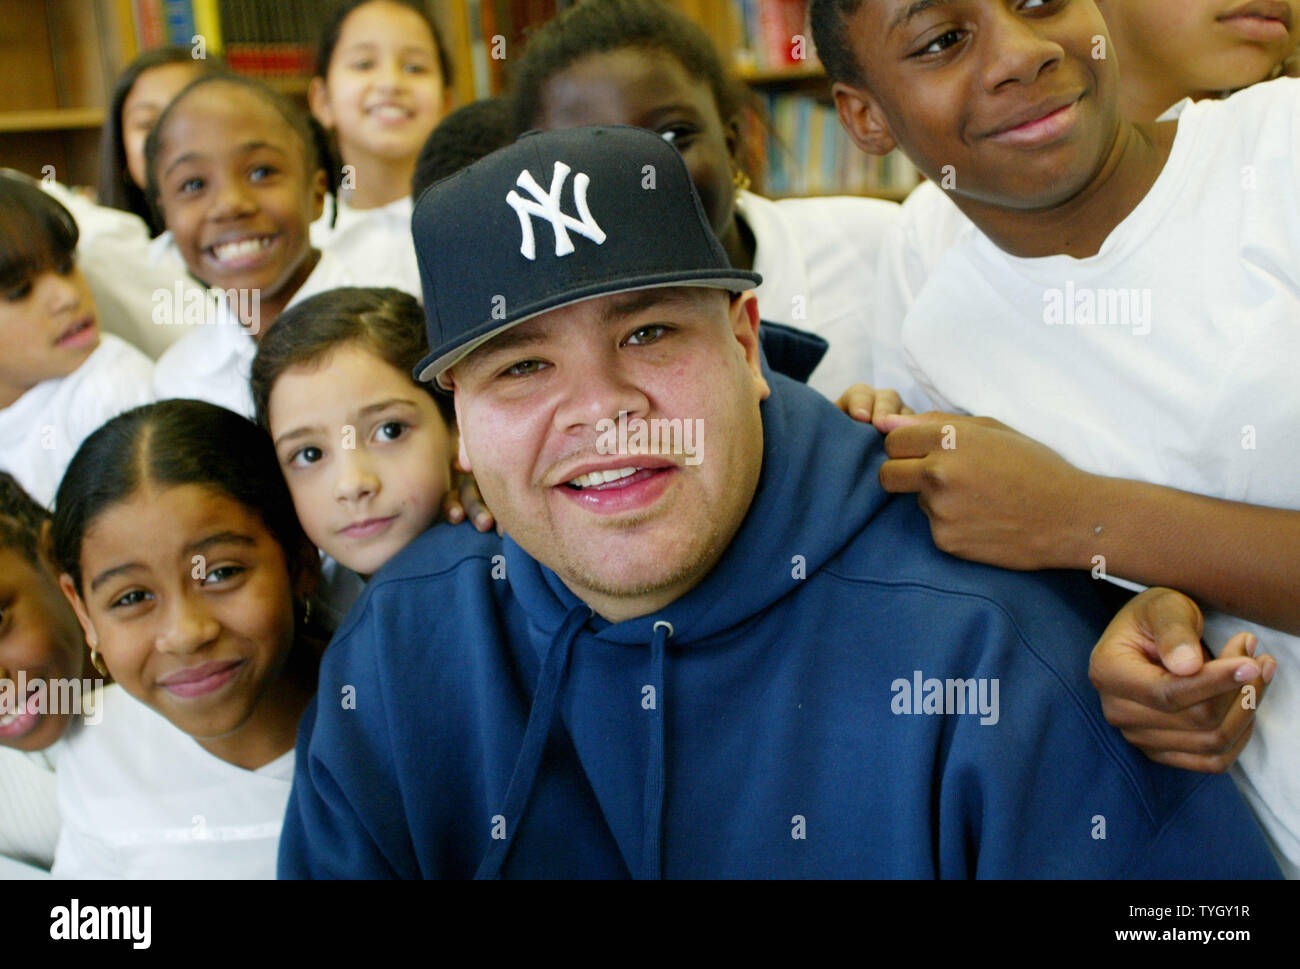 Joseph Cartegena, known as hip-hop artist Fat Joe, poses with students at PS 146 where he donated 20 new computers to the Bronx school, which he attended as a child, on December 21, 2004 in New York City.  (UPI Photo/Monika Graff) Stock Photo